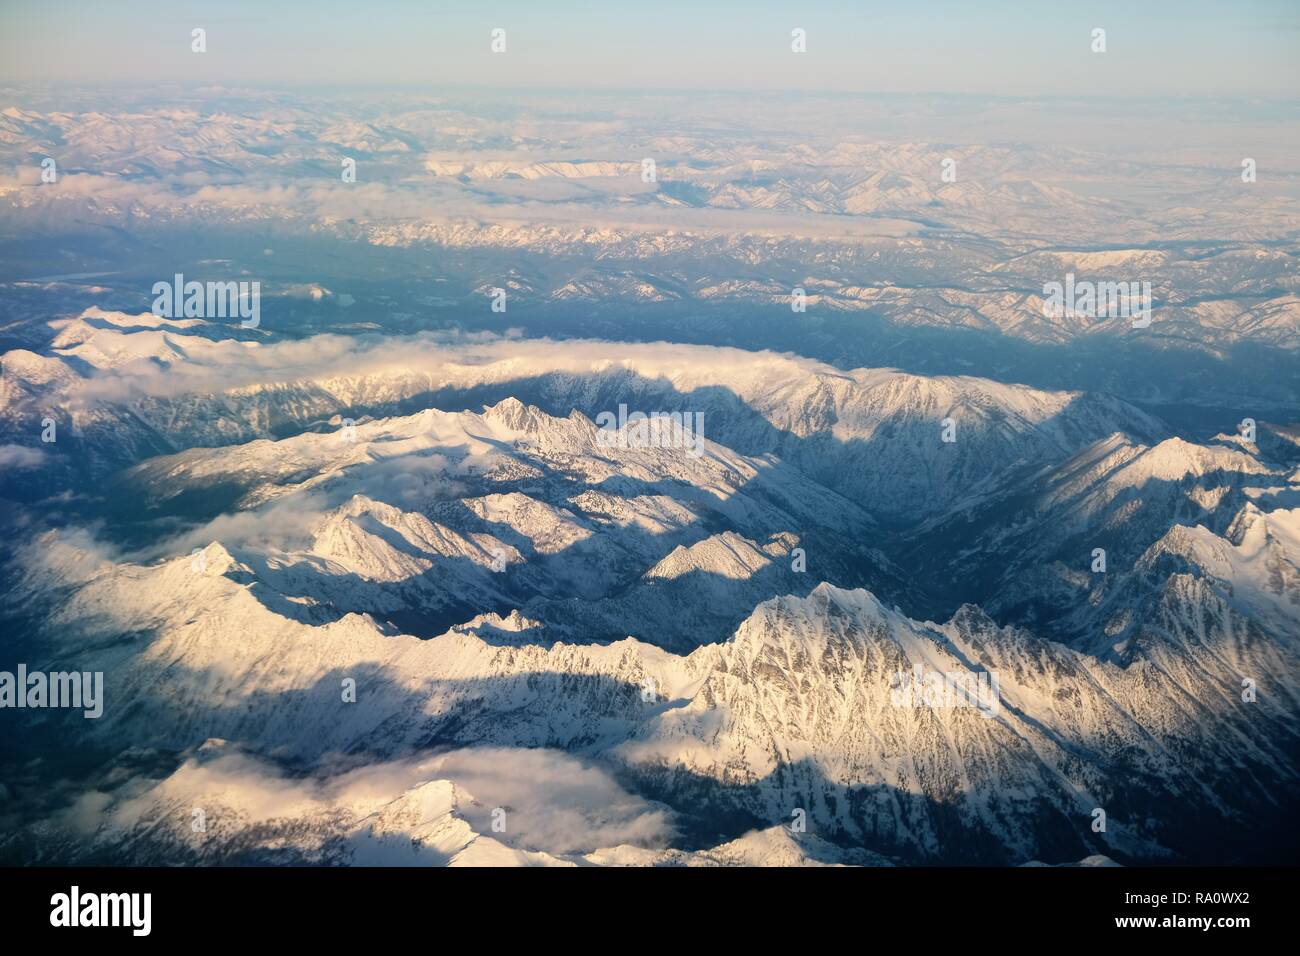 The Cascade Mountains in the Pacific Northwest (Seattle, Washington, USA); snowy peaks from above. Stock Photo